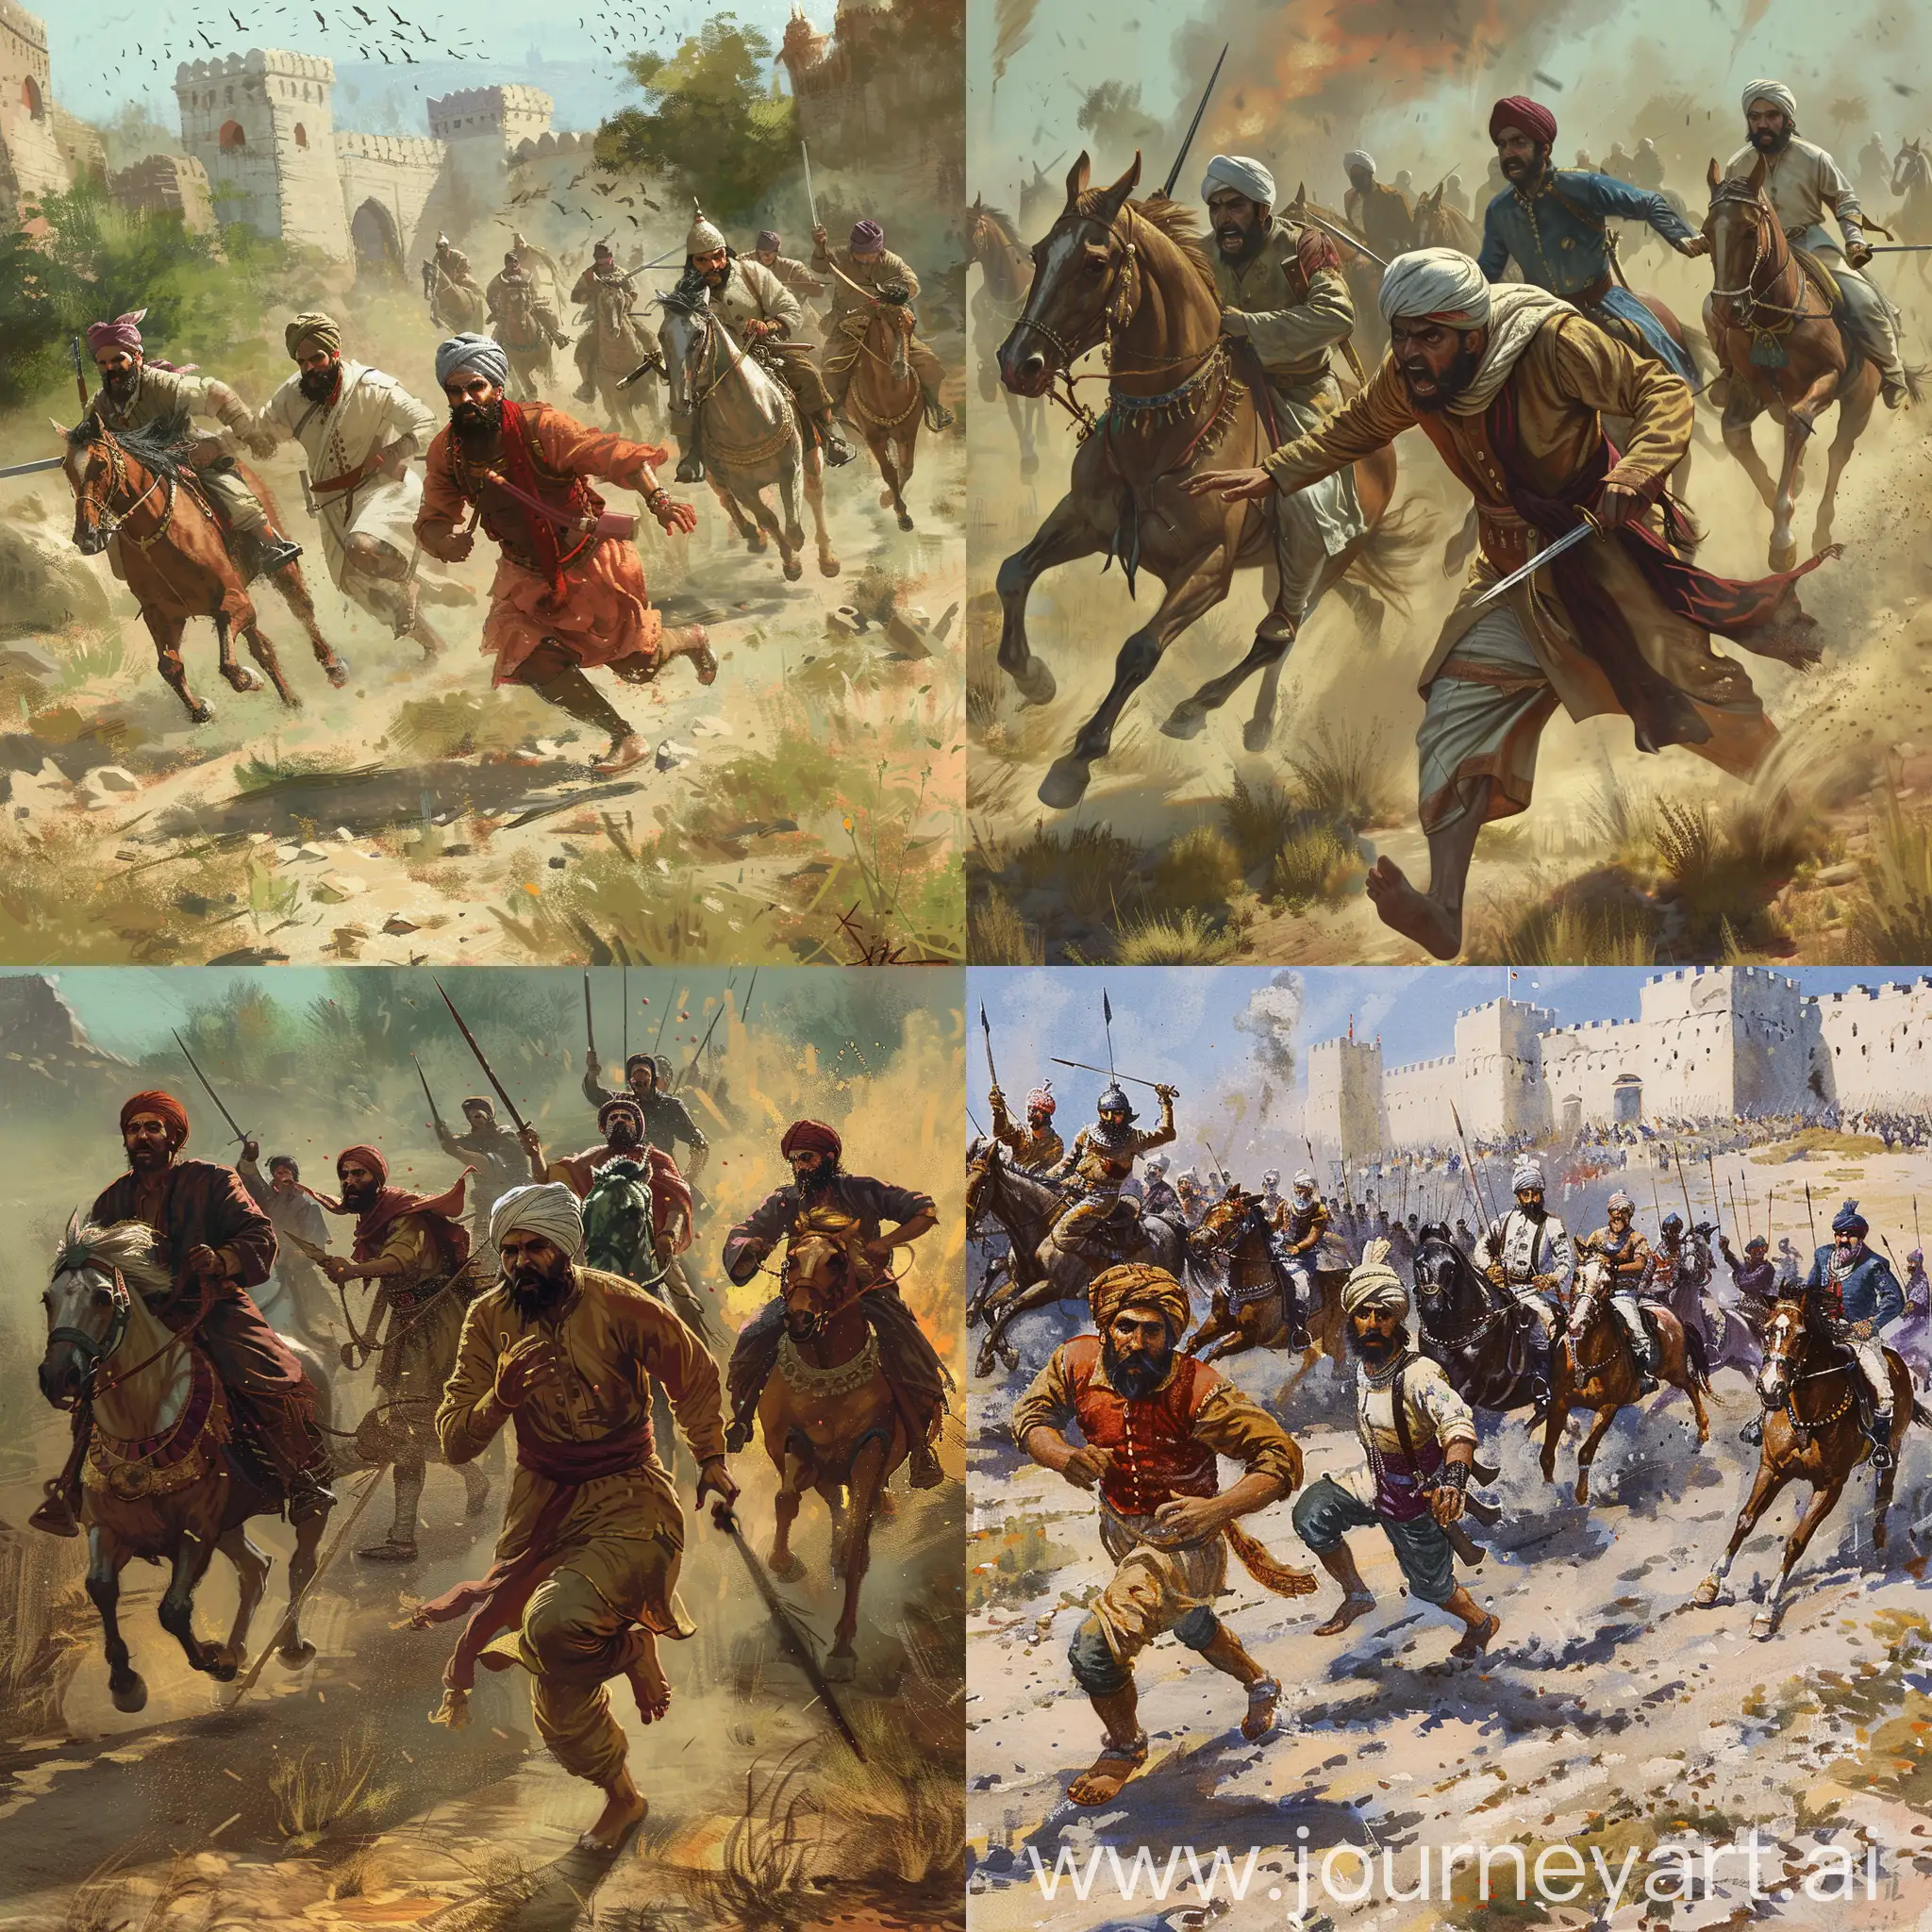 year is 1527 CE. Imagine 10 Mughal soldiers running away scared from the battlefield while 5 rajput horsemen with swords are chasing them.